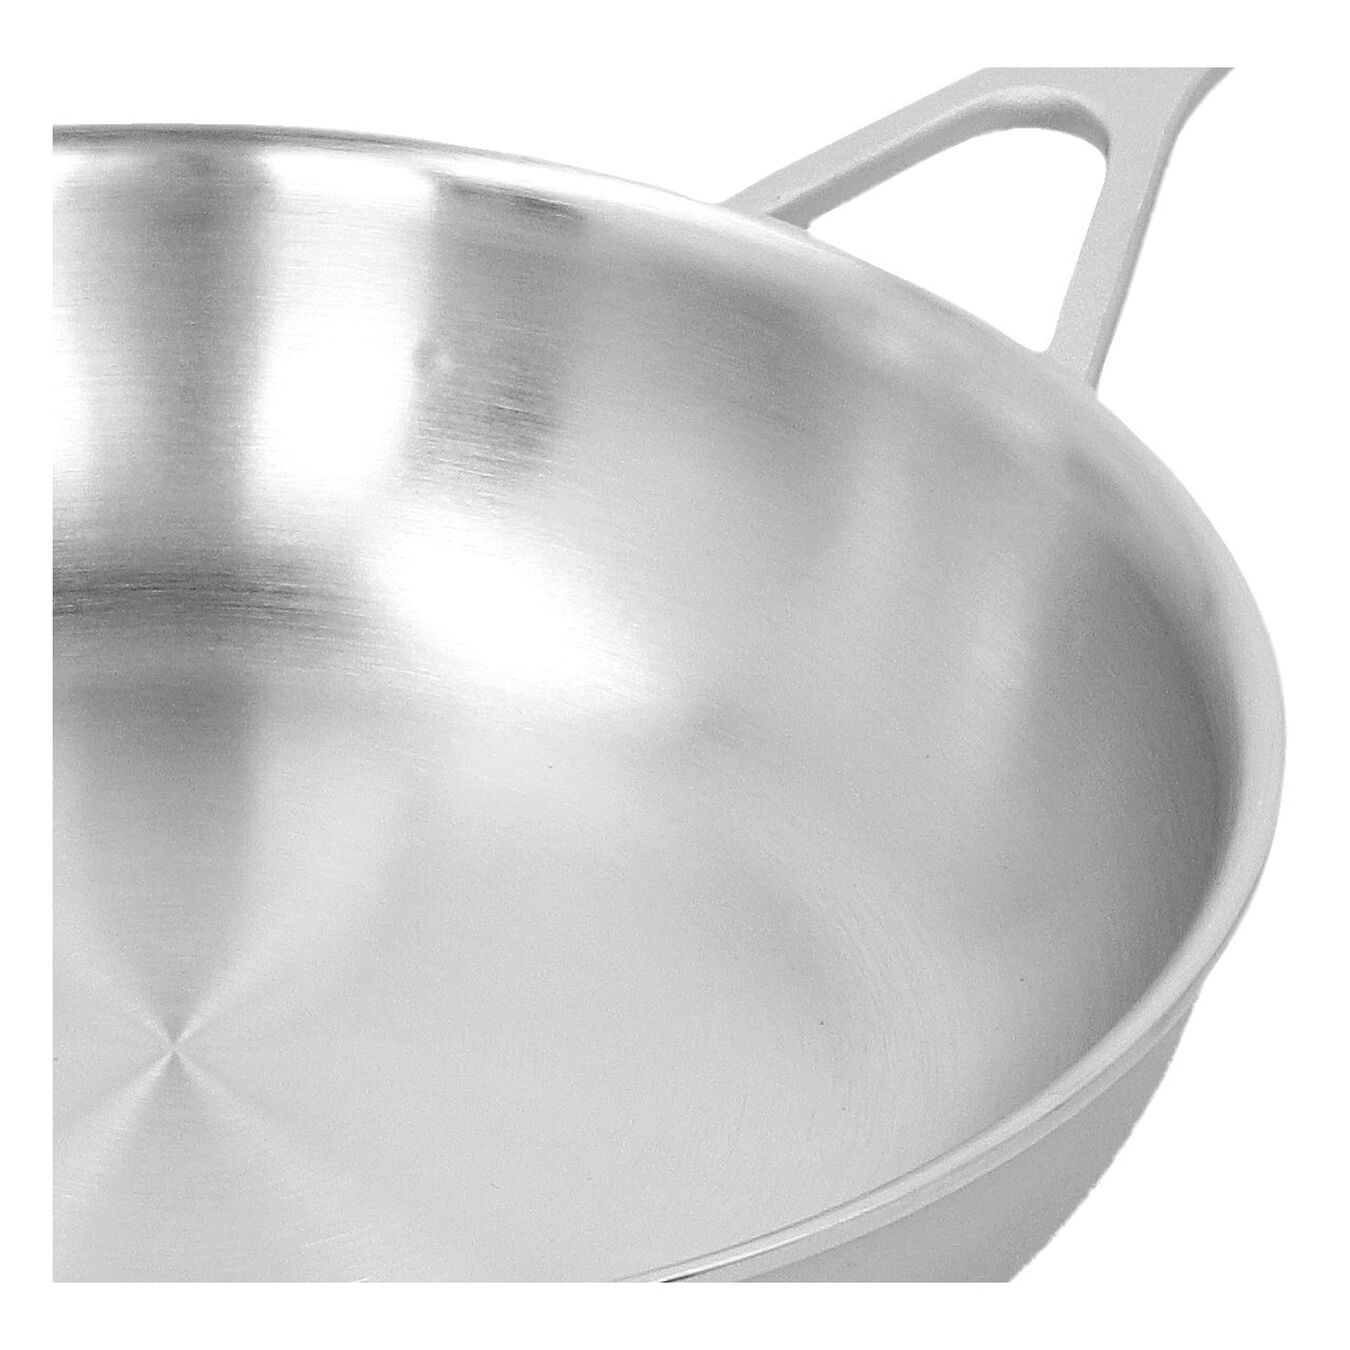 8-inch, 18/10 Stainless Steel, Frying pan,,large 3